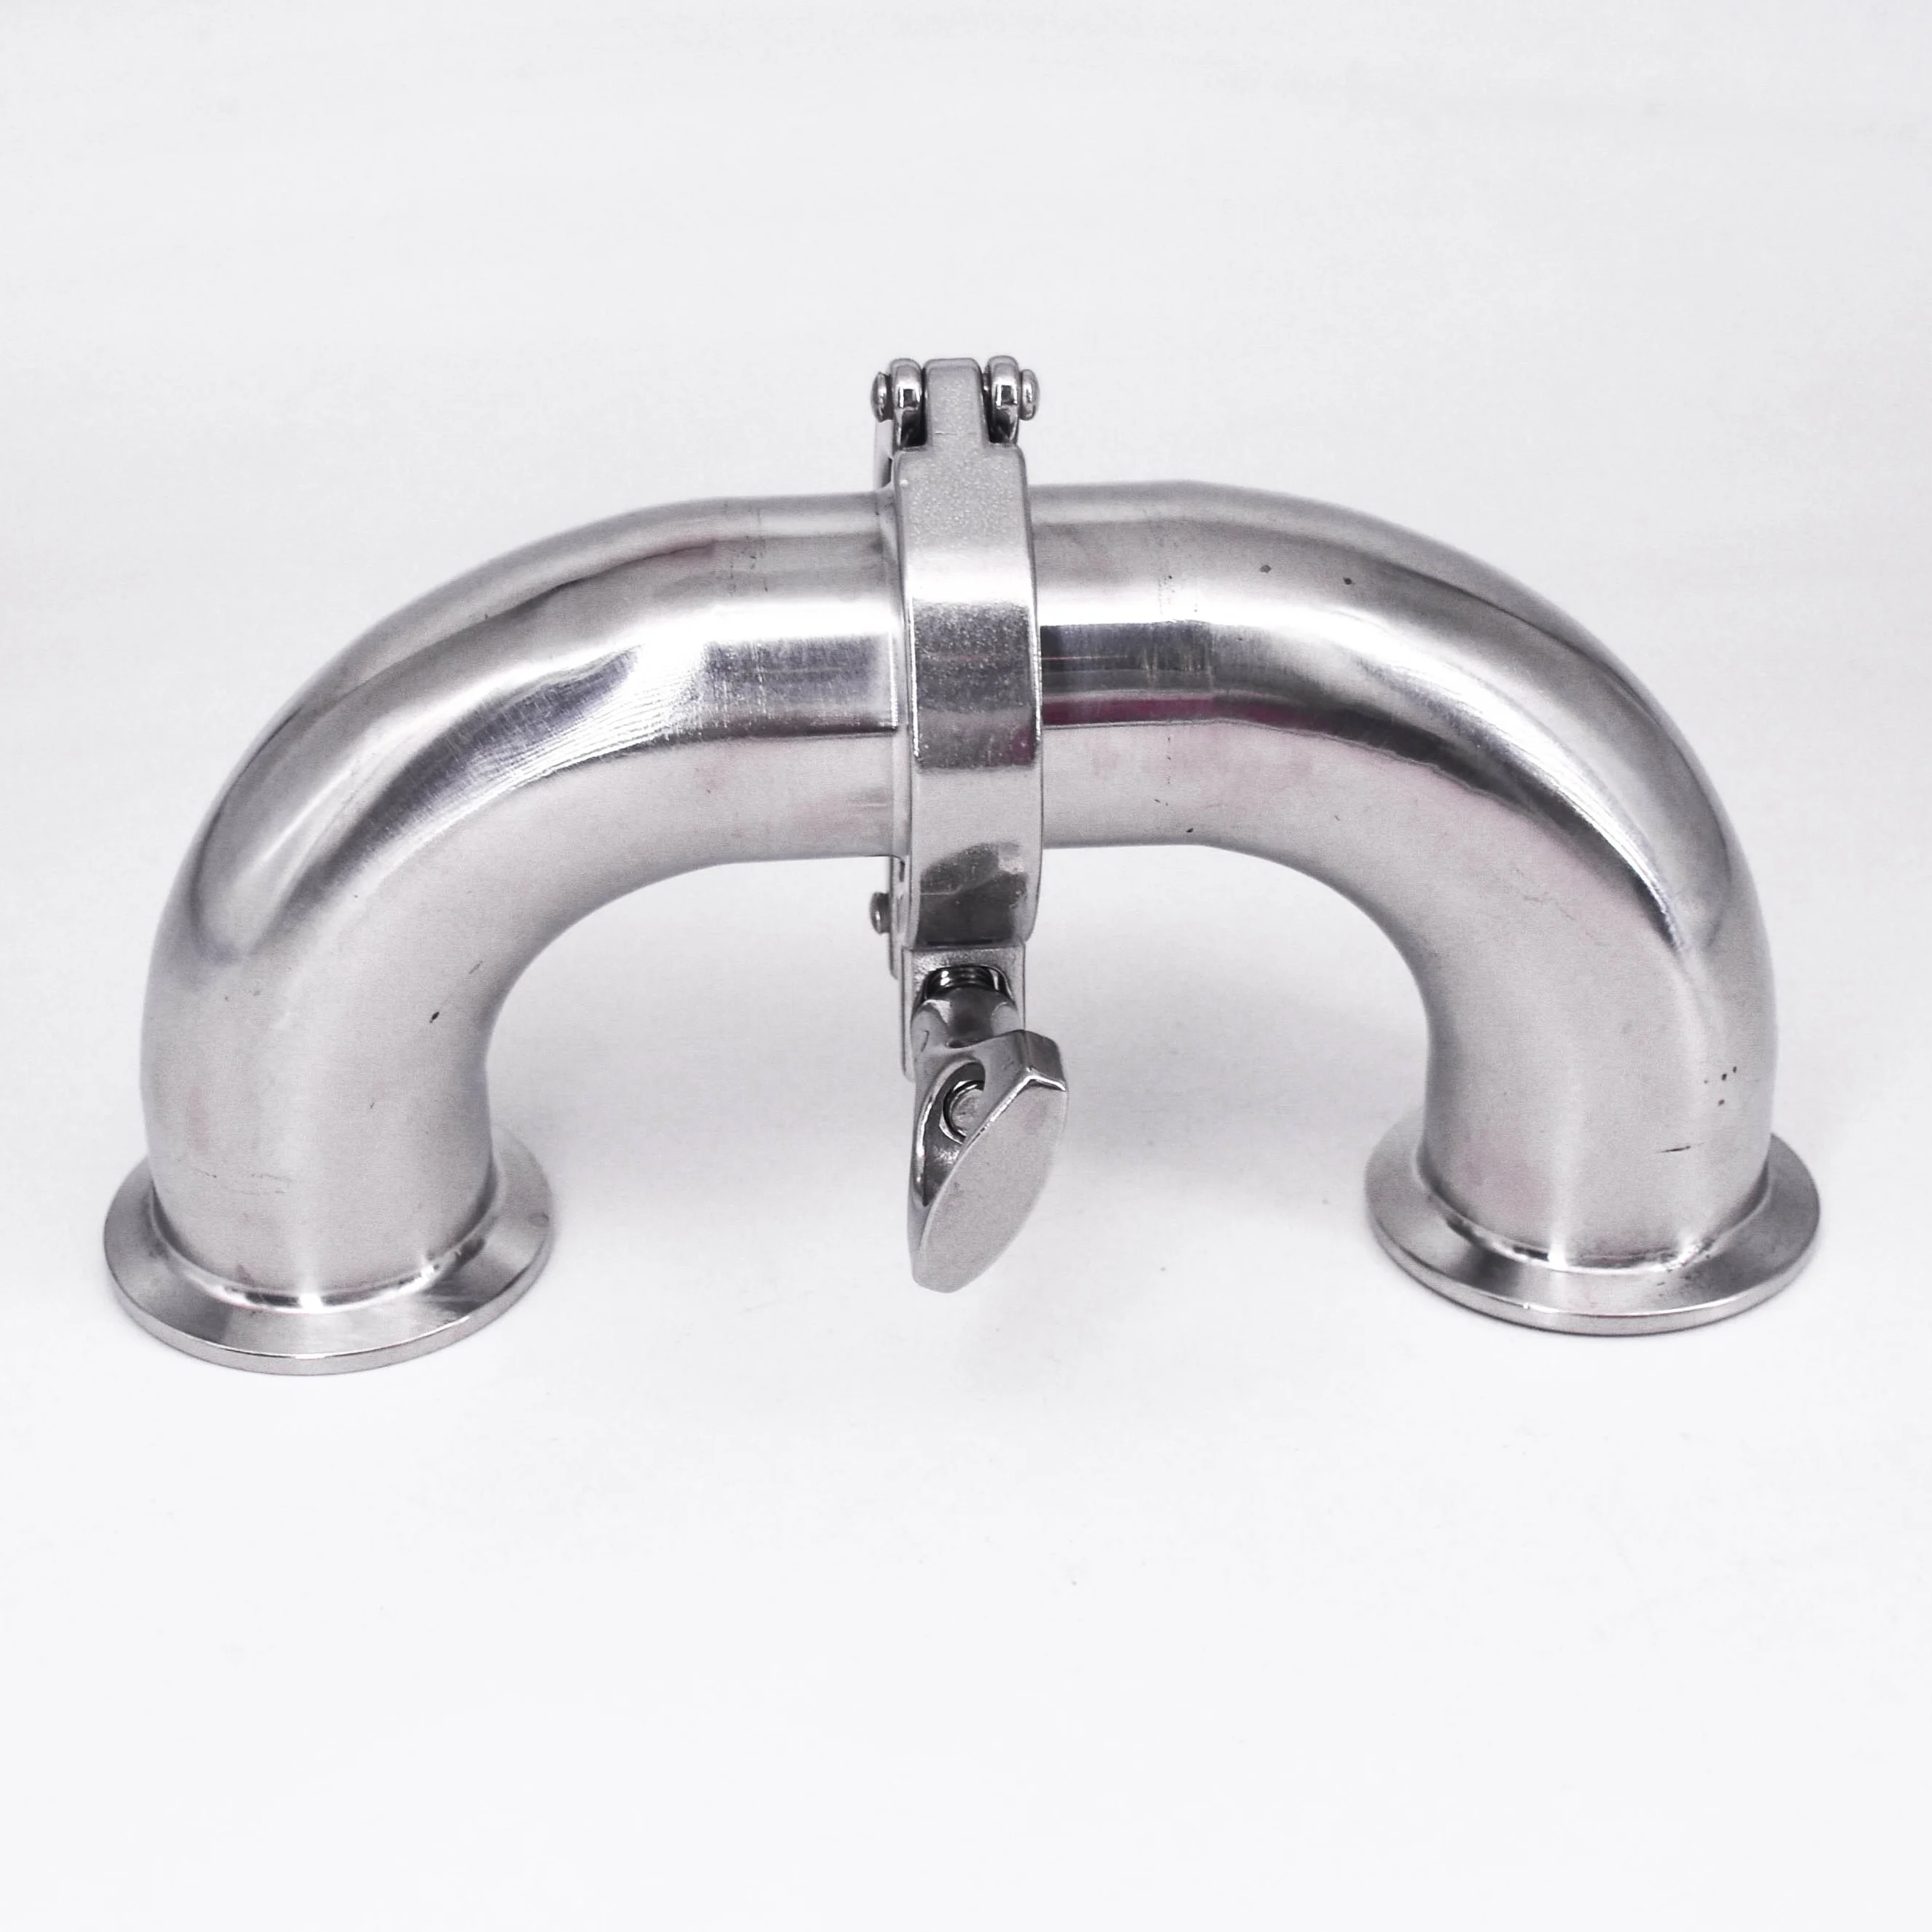 

0.5" 1.5" 2" 2.5" 3" 3.5" 4" Tri Clamp 180 Degree Elbow SUS304 316L Stainless Steel Sanitary Pipe Fitting Connector Homebrew